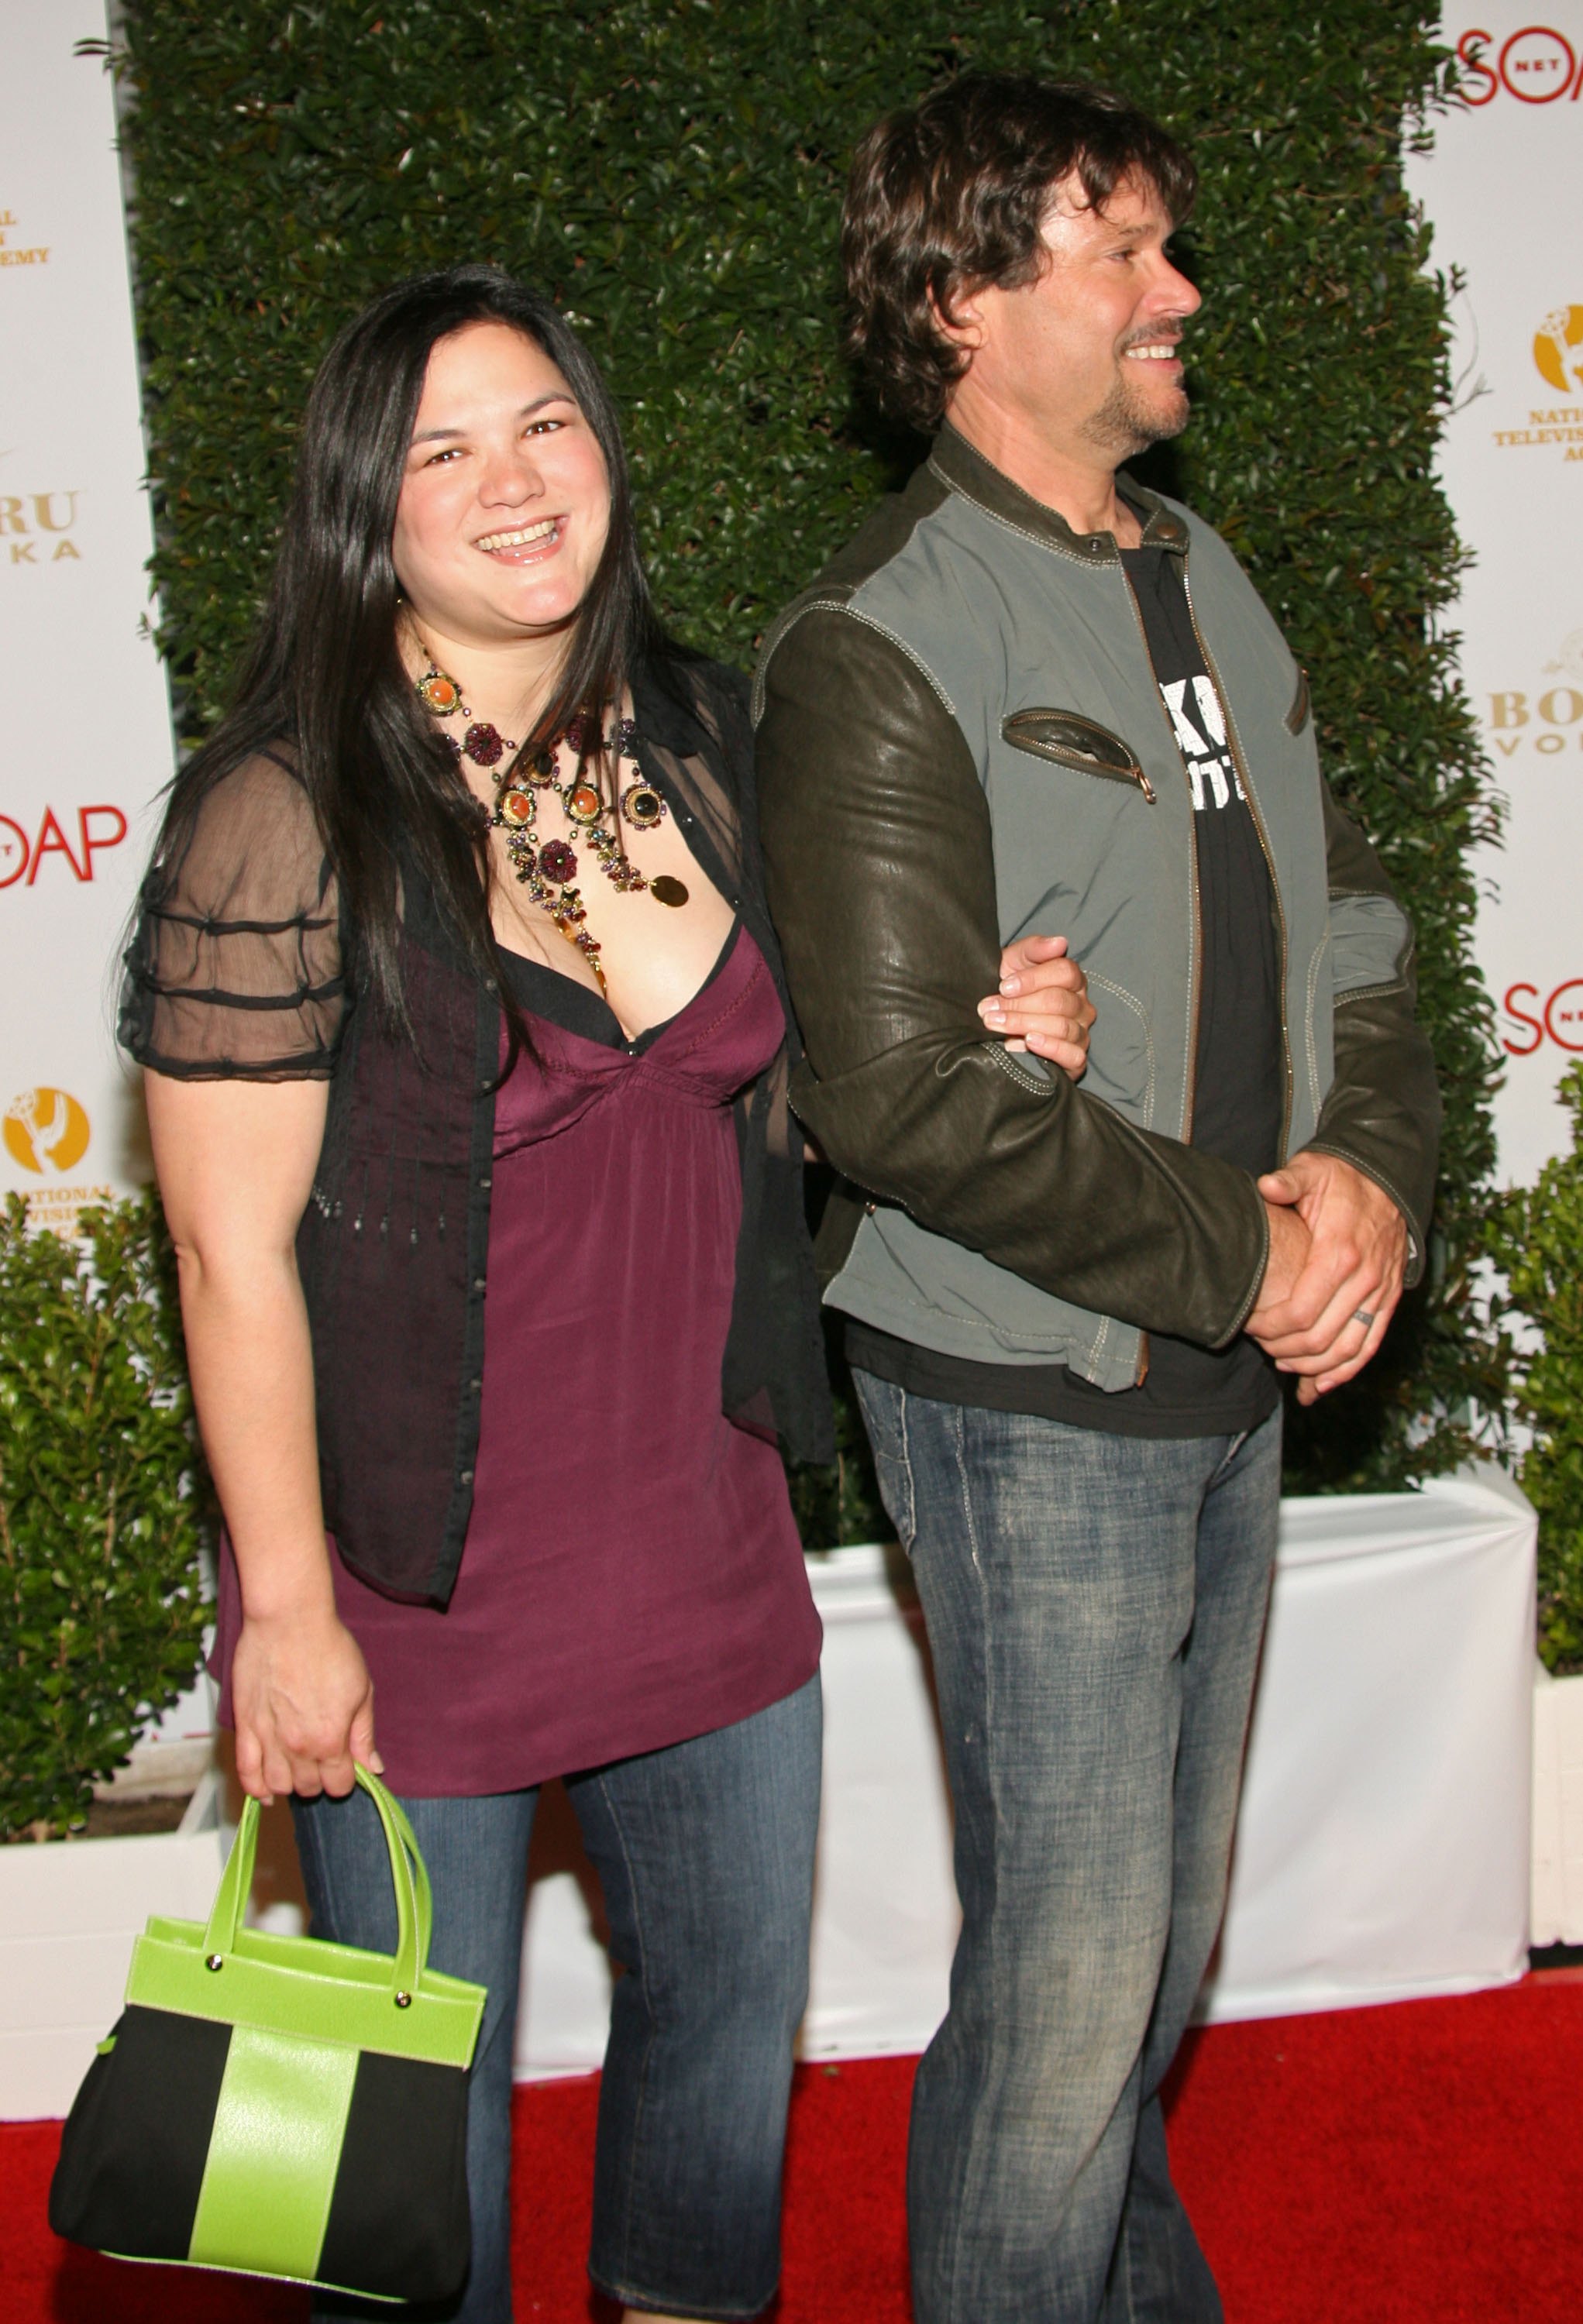 Peter Reckell and Kelly Moneymaker at the Hollywood Roosevelt Hotel on April 28, 2006 in Hollywood, California | Source: Getty Images